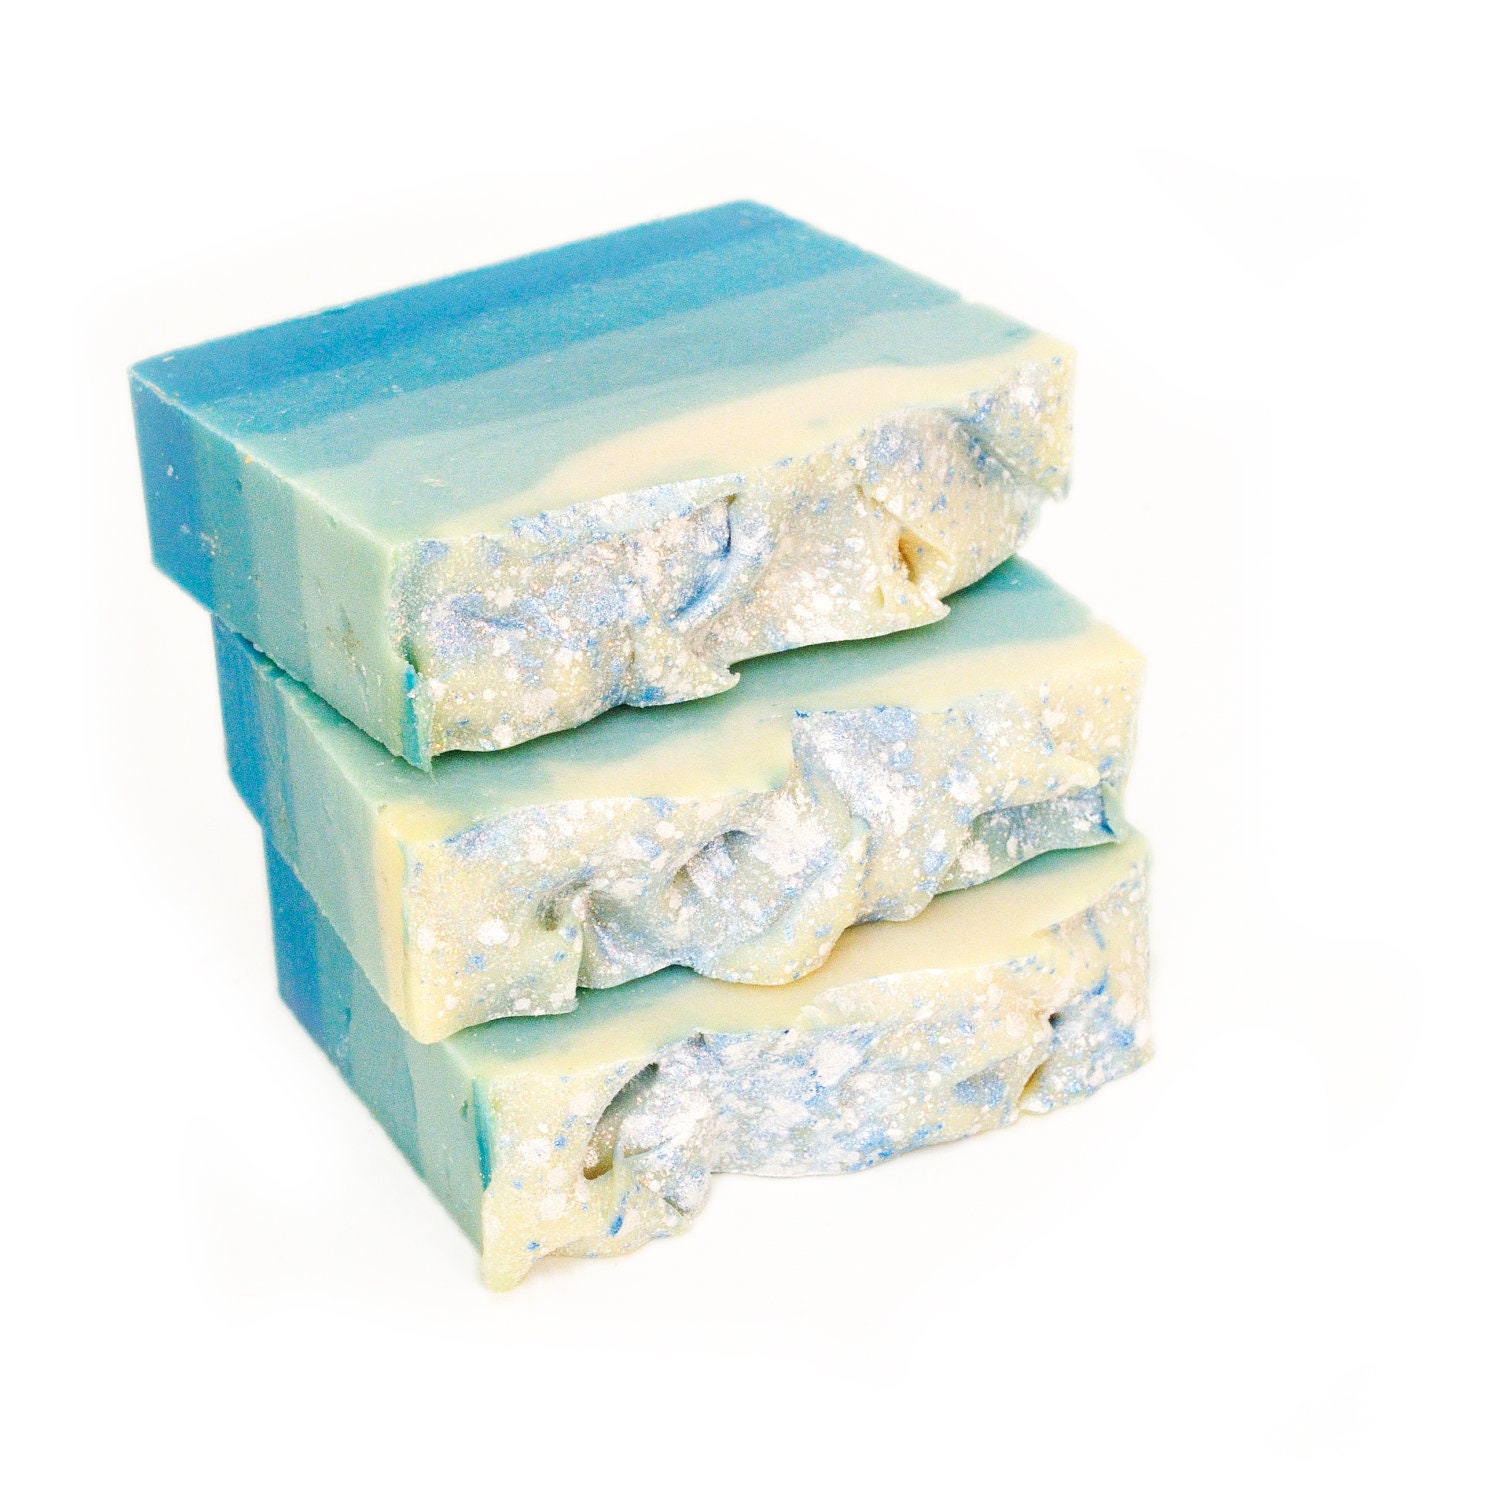 Snowflake Shea Butter Soap - Fresh Snow Handcrafted Cold Process Soap - amathia